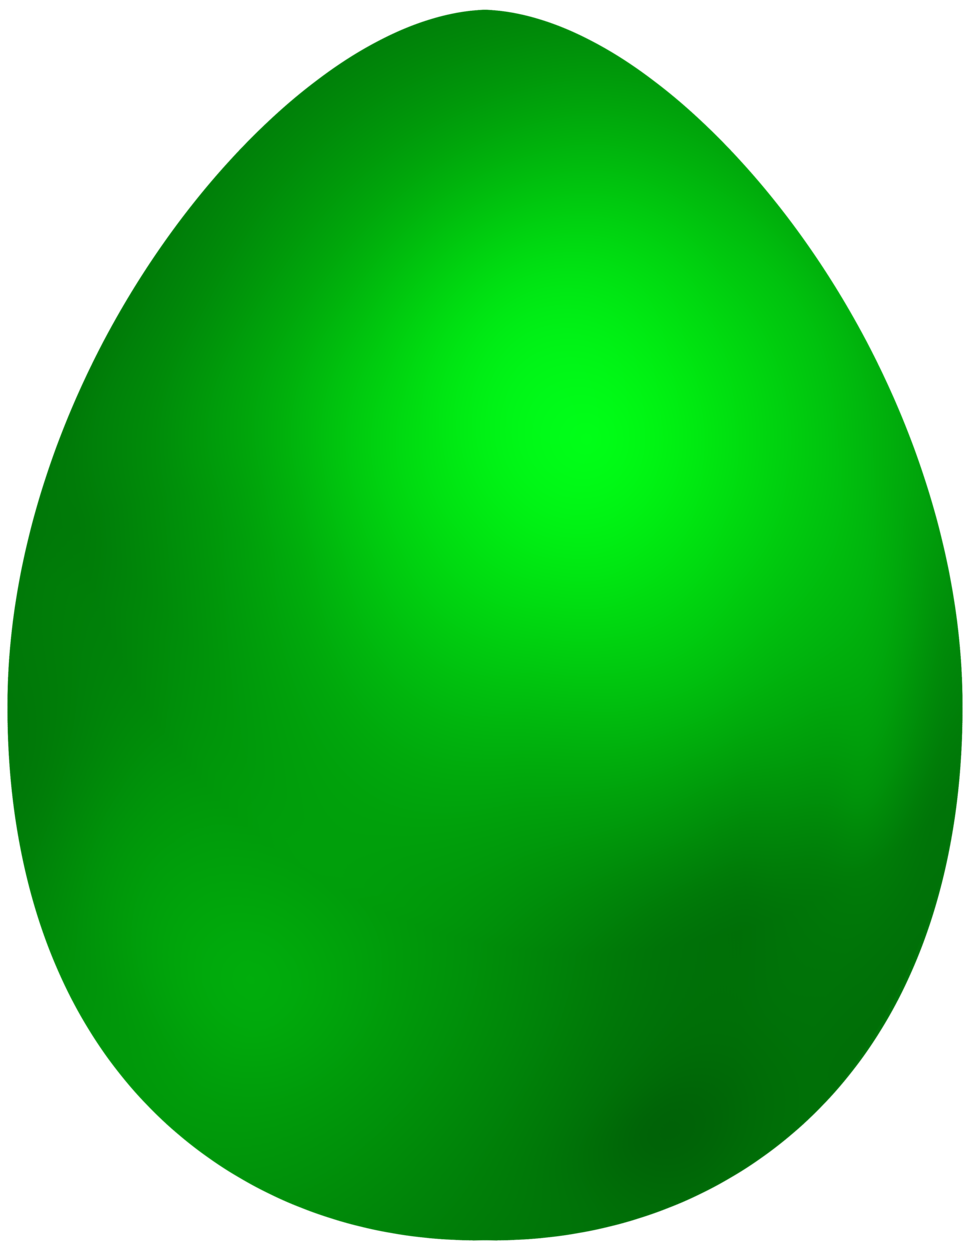 Oval clipart oval egg. Green easter png clip